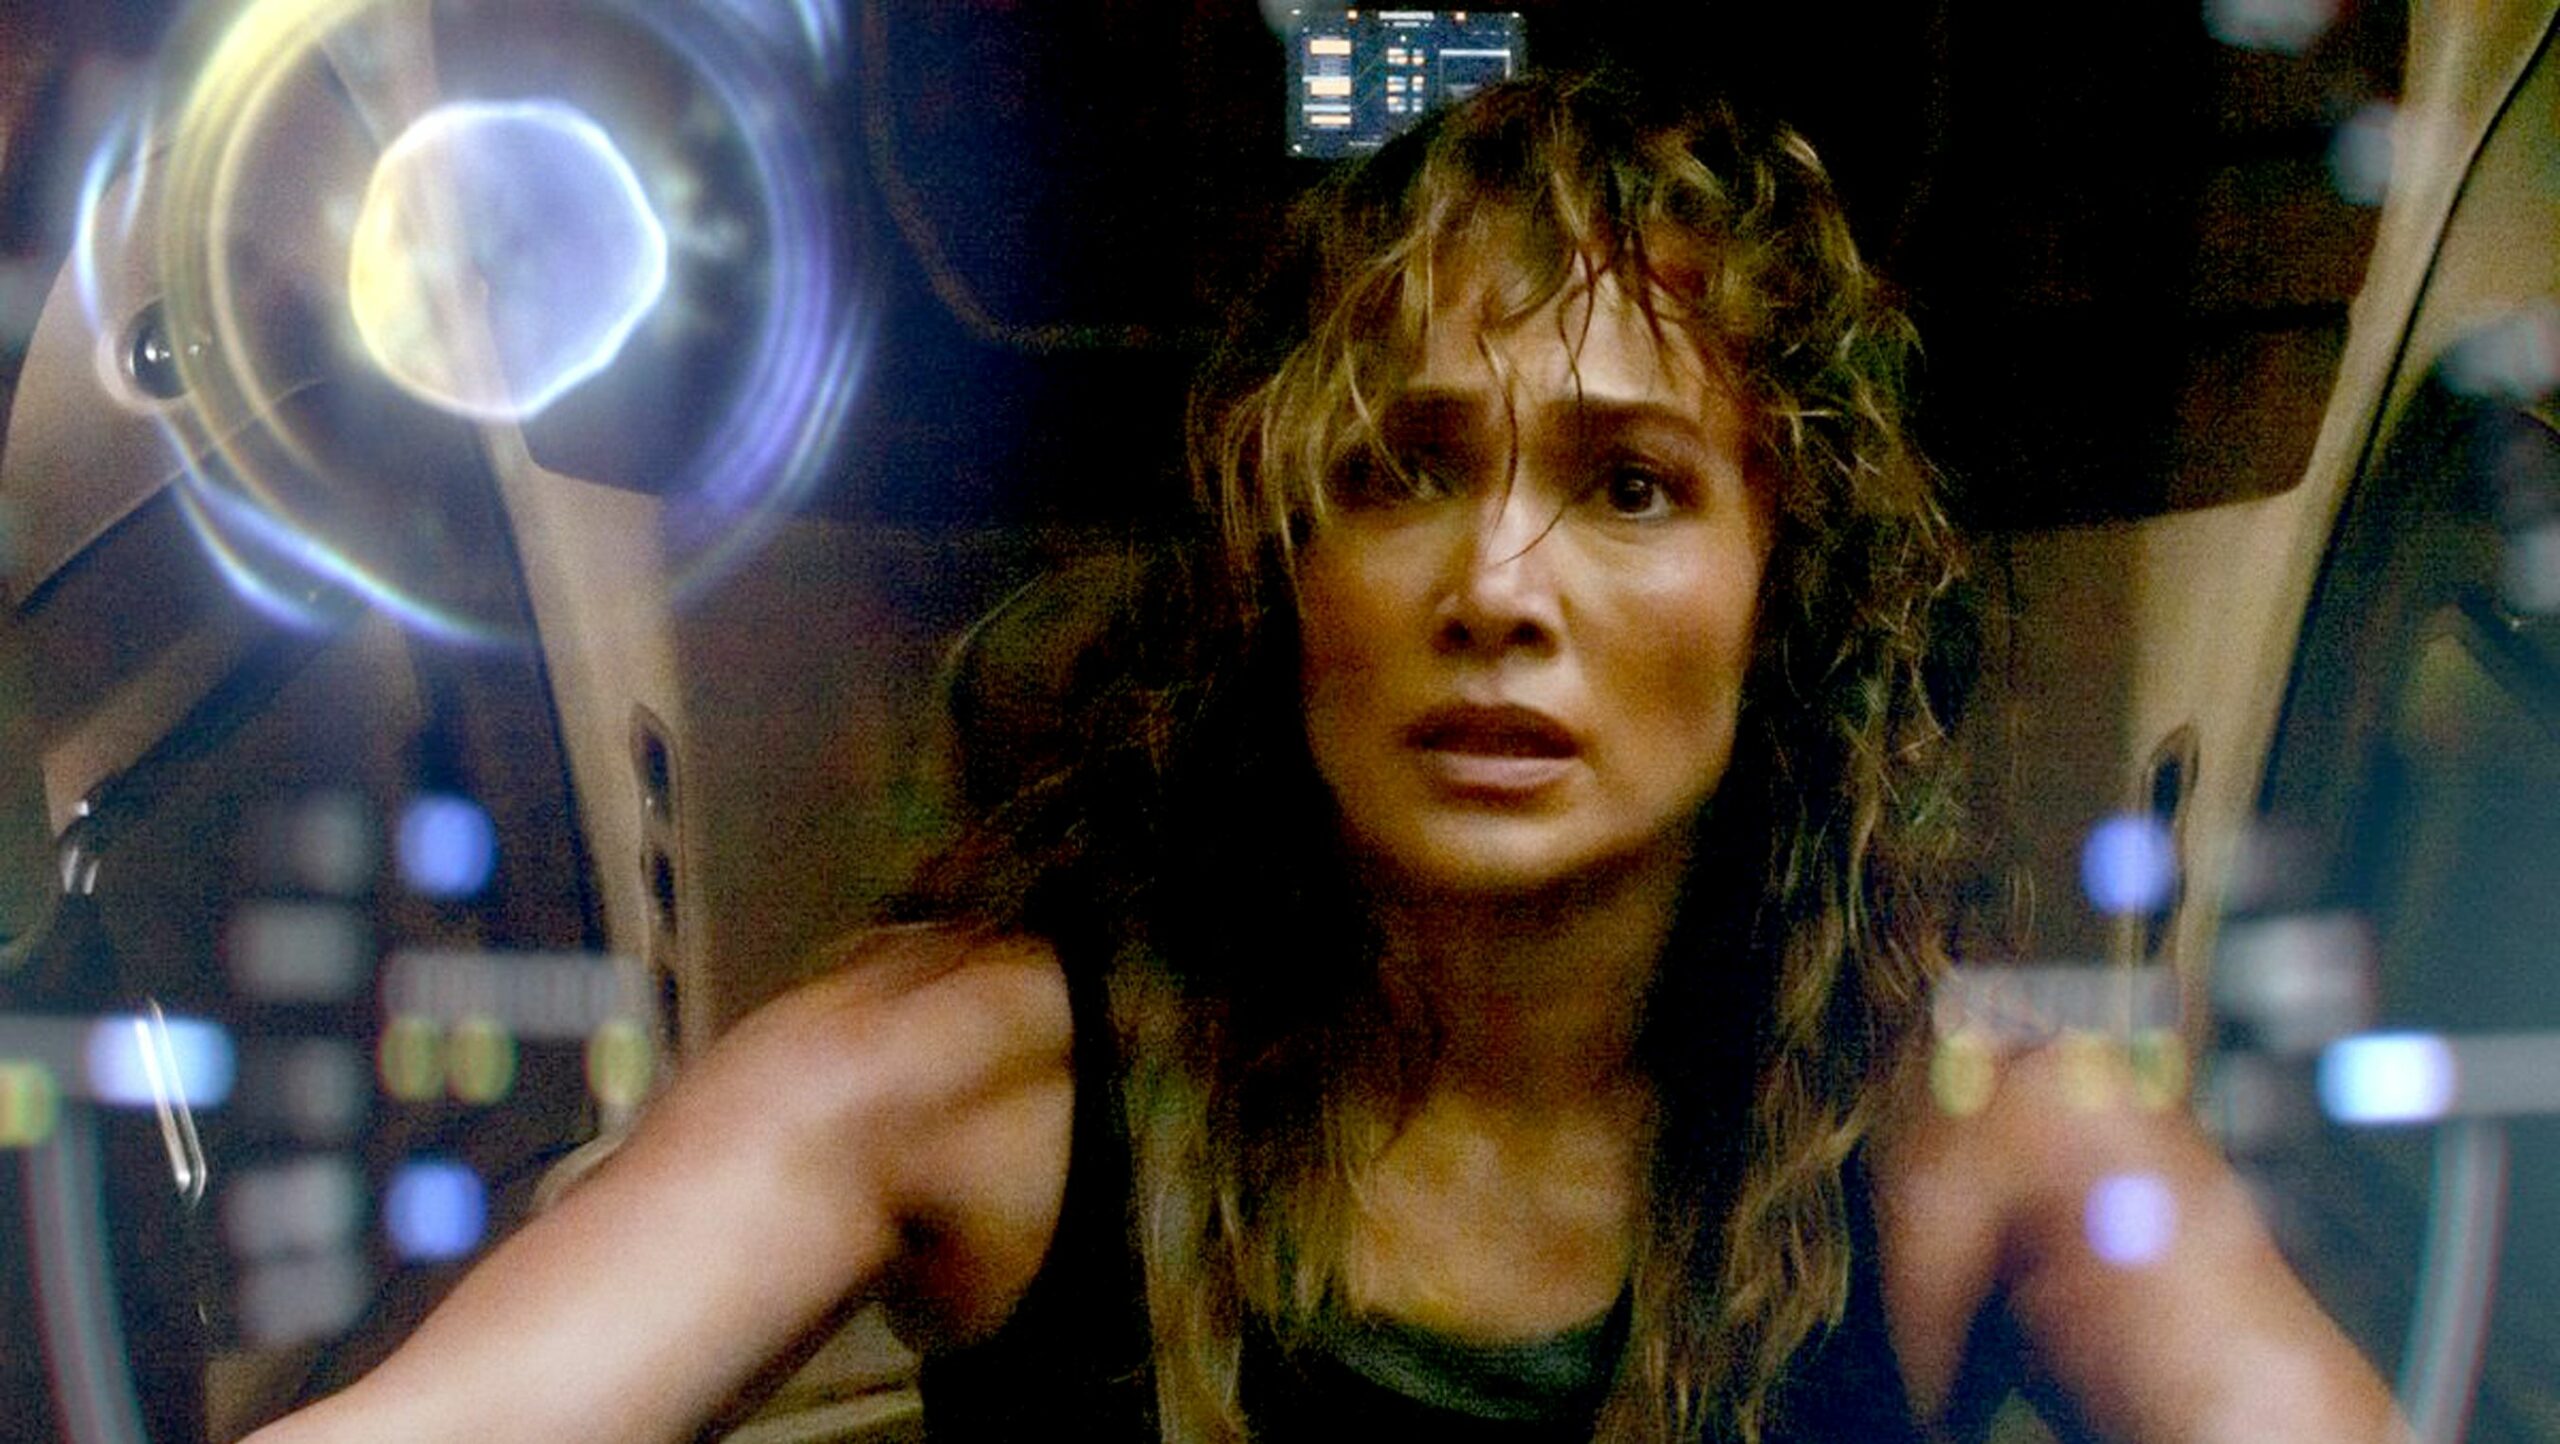 Jennifer Lopez Faces Another Setback with New Netflix Sci-Fi 'Atlas' — Not Her Worst Film, But Far from Best